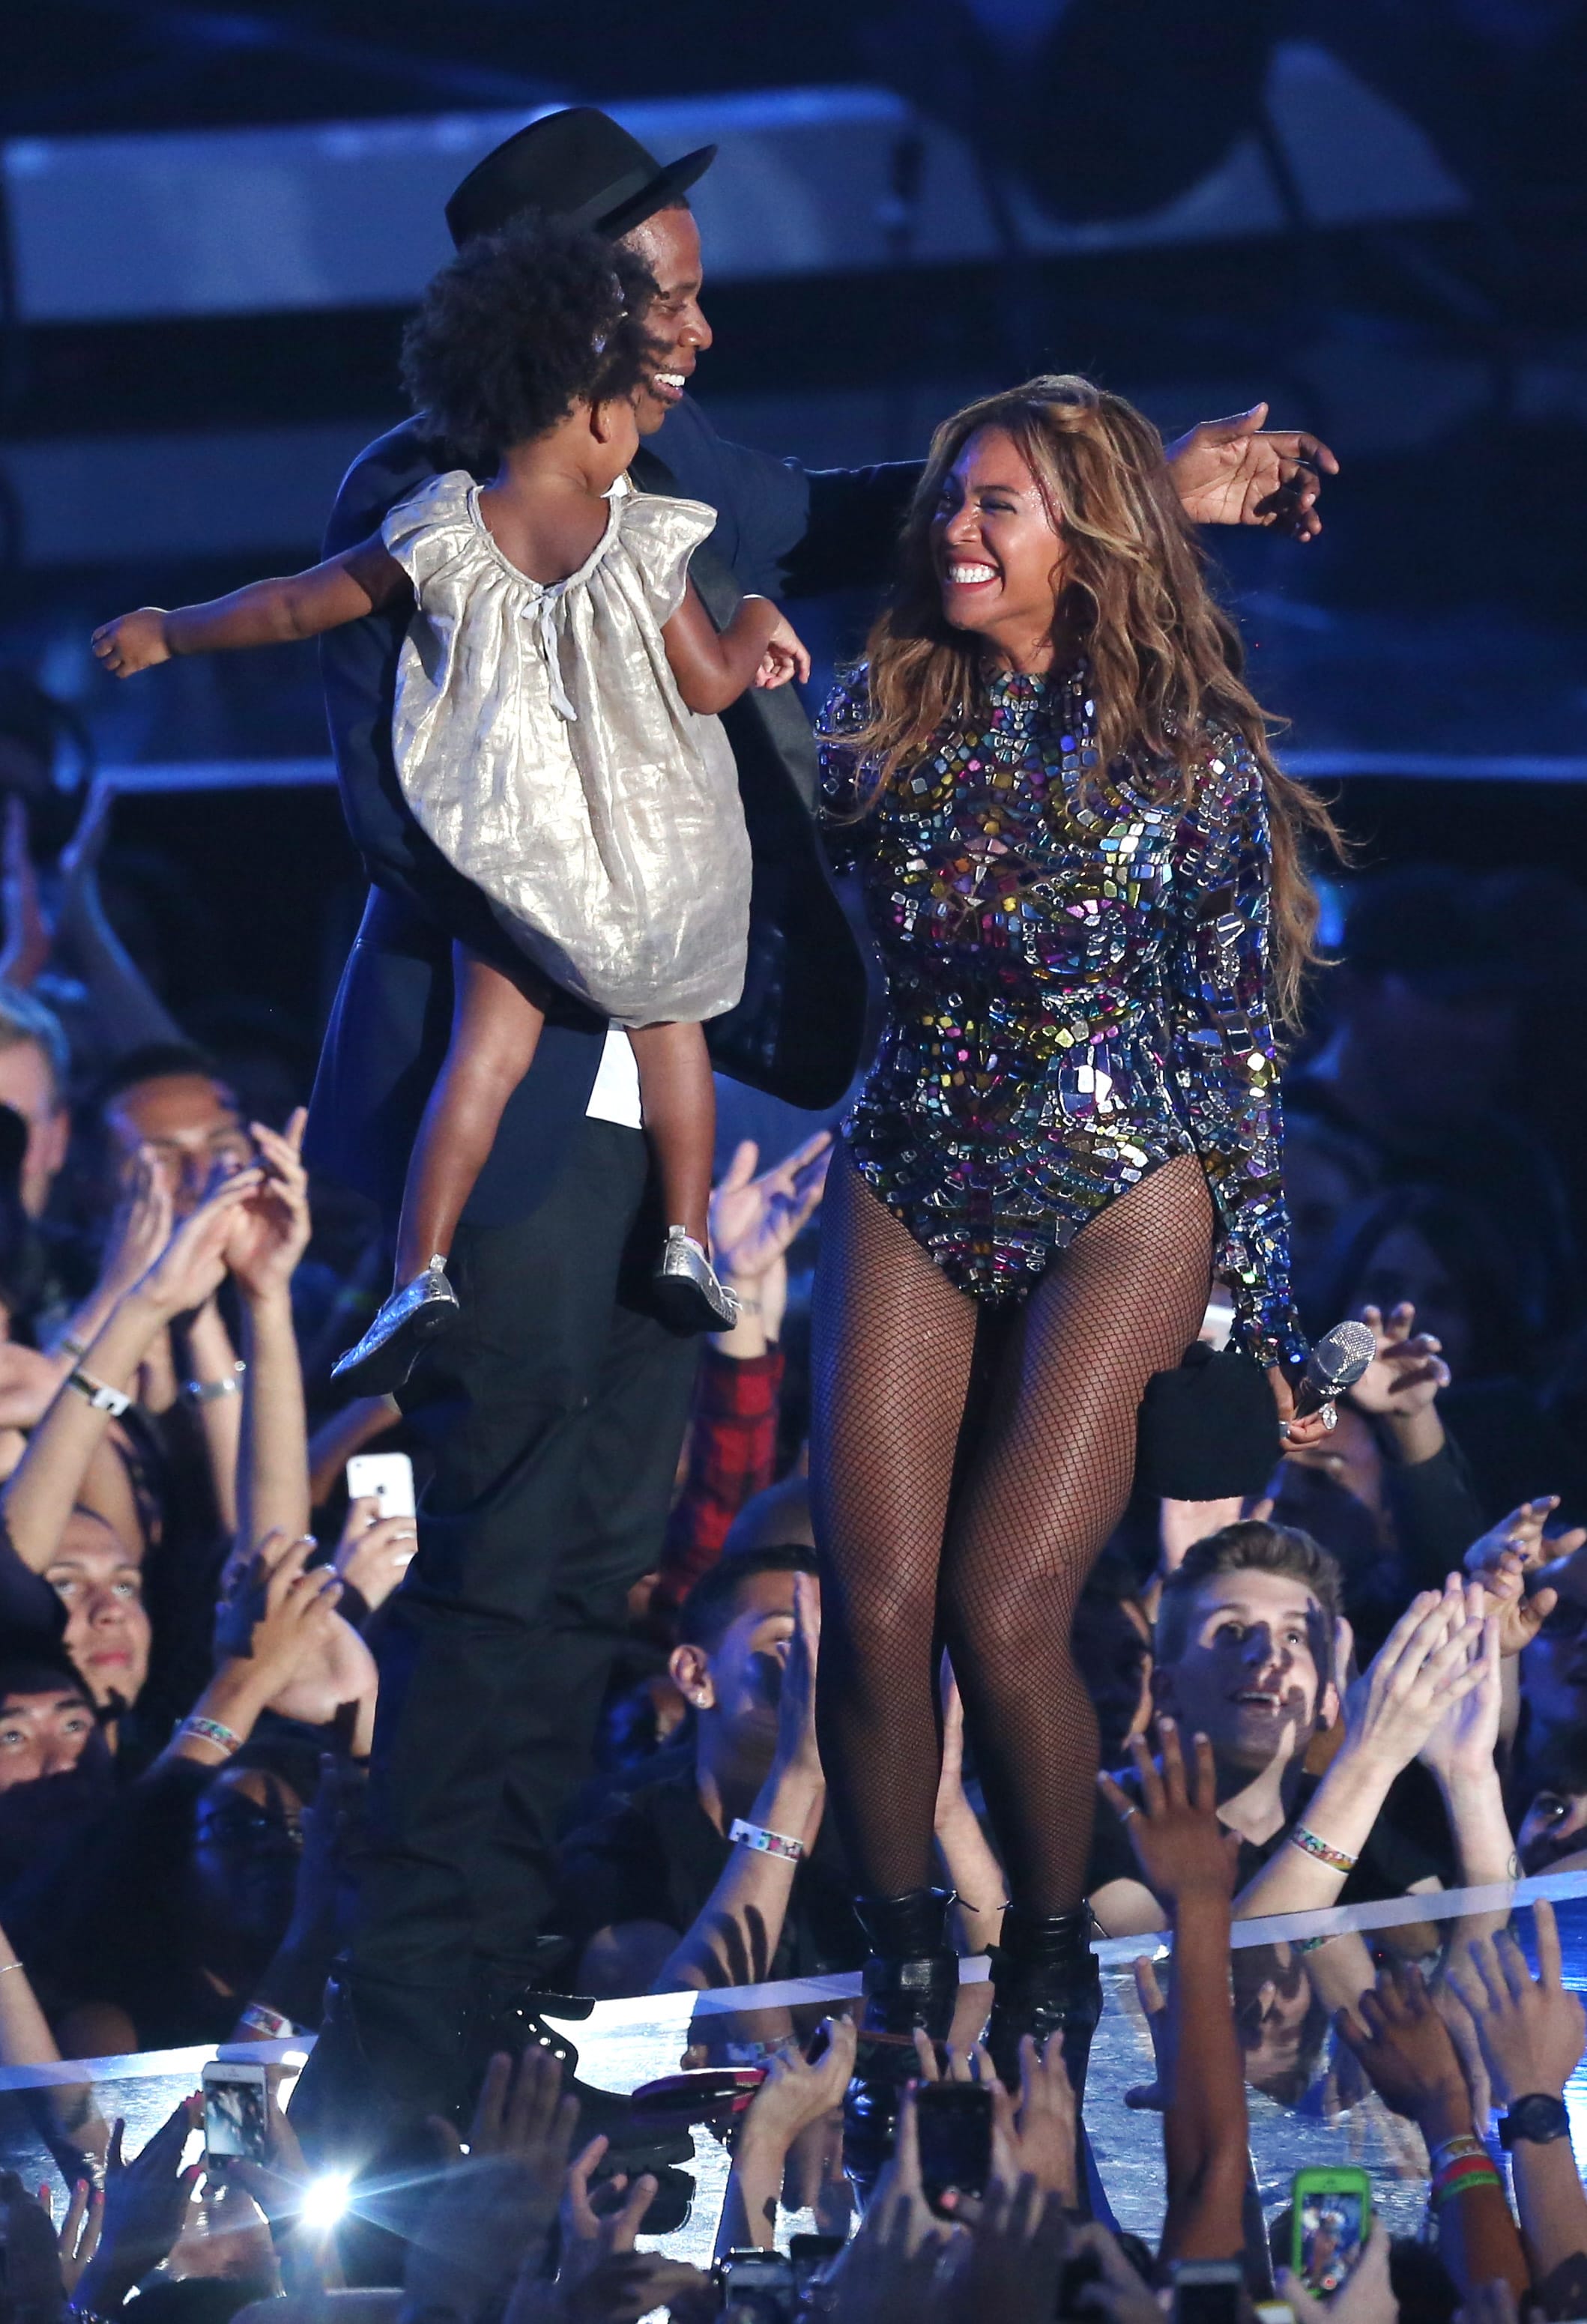 Beyonce accepts the Video Vanguard Award at the MTV Video Music Awards at The Forum on Sunday in Inglewood, Calif.